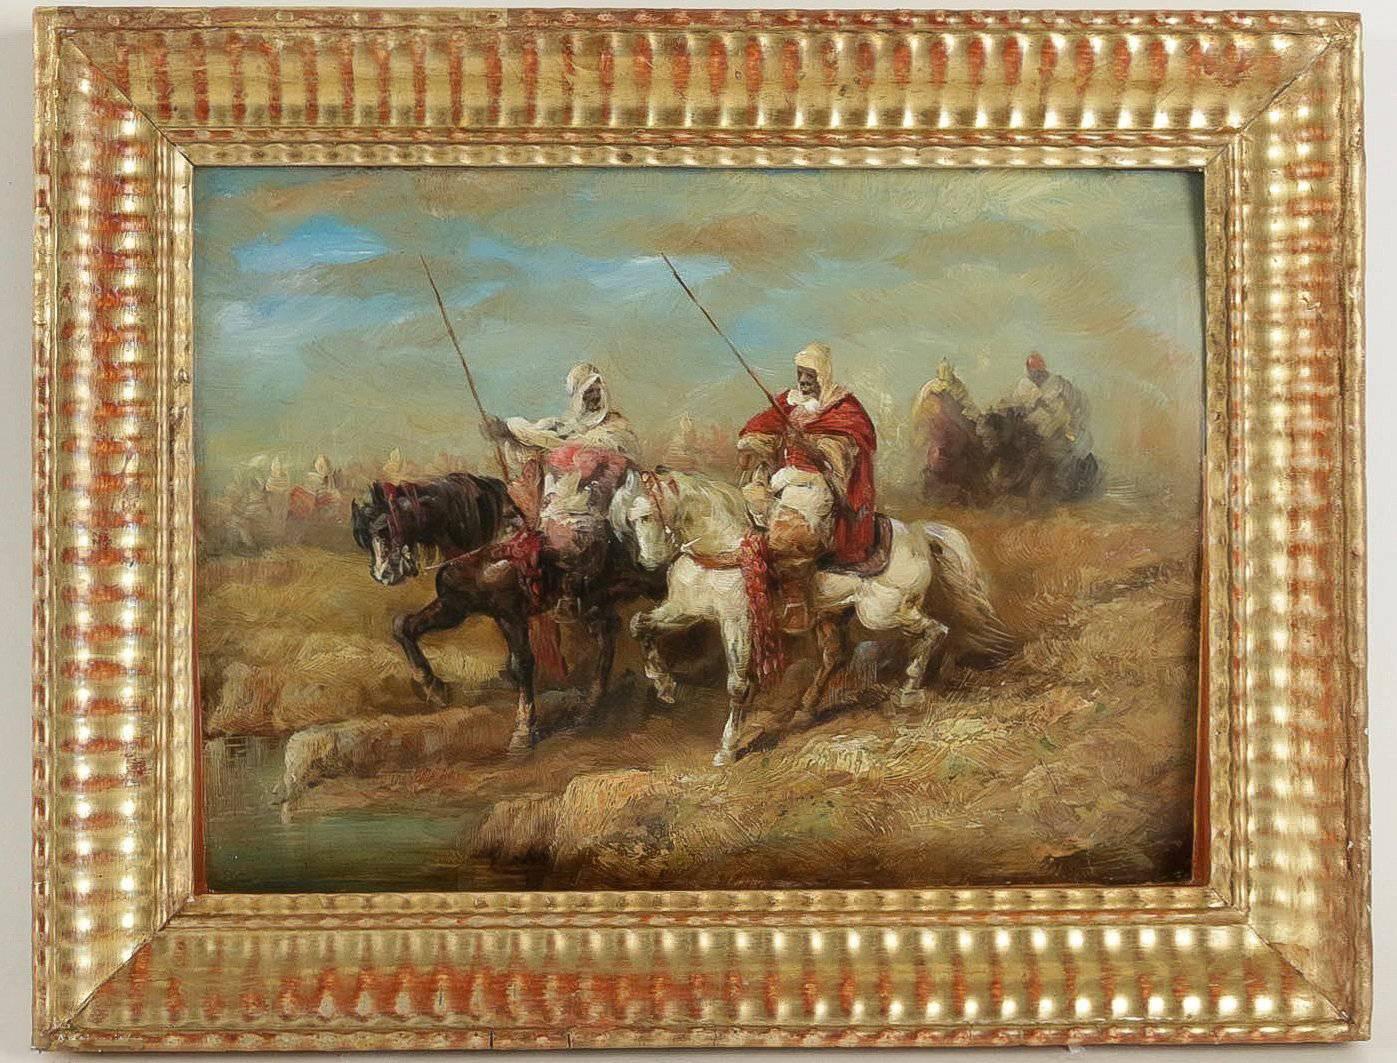 We are pleased to present you very interesting and ornamental small oil on panel depicting The Arabian Riders Horseback.

Fine qualities in this attractive painting, painted between 1856 and 1861 and attributed to Adolf Schreyer during his trip to